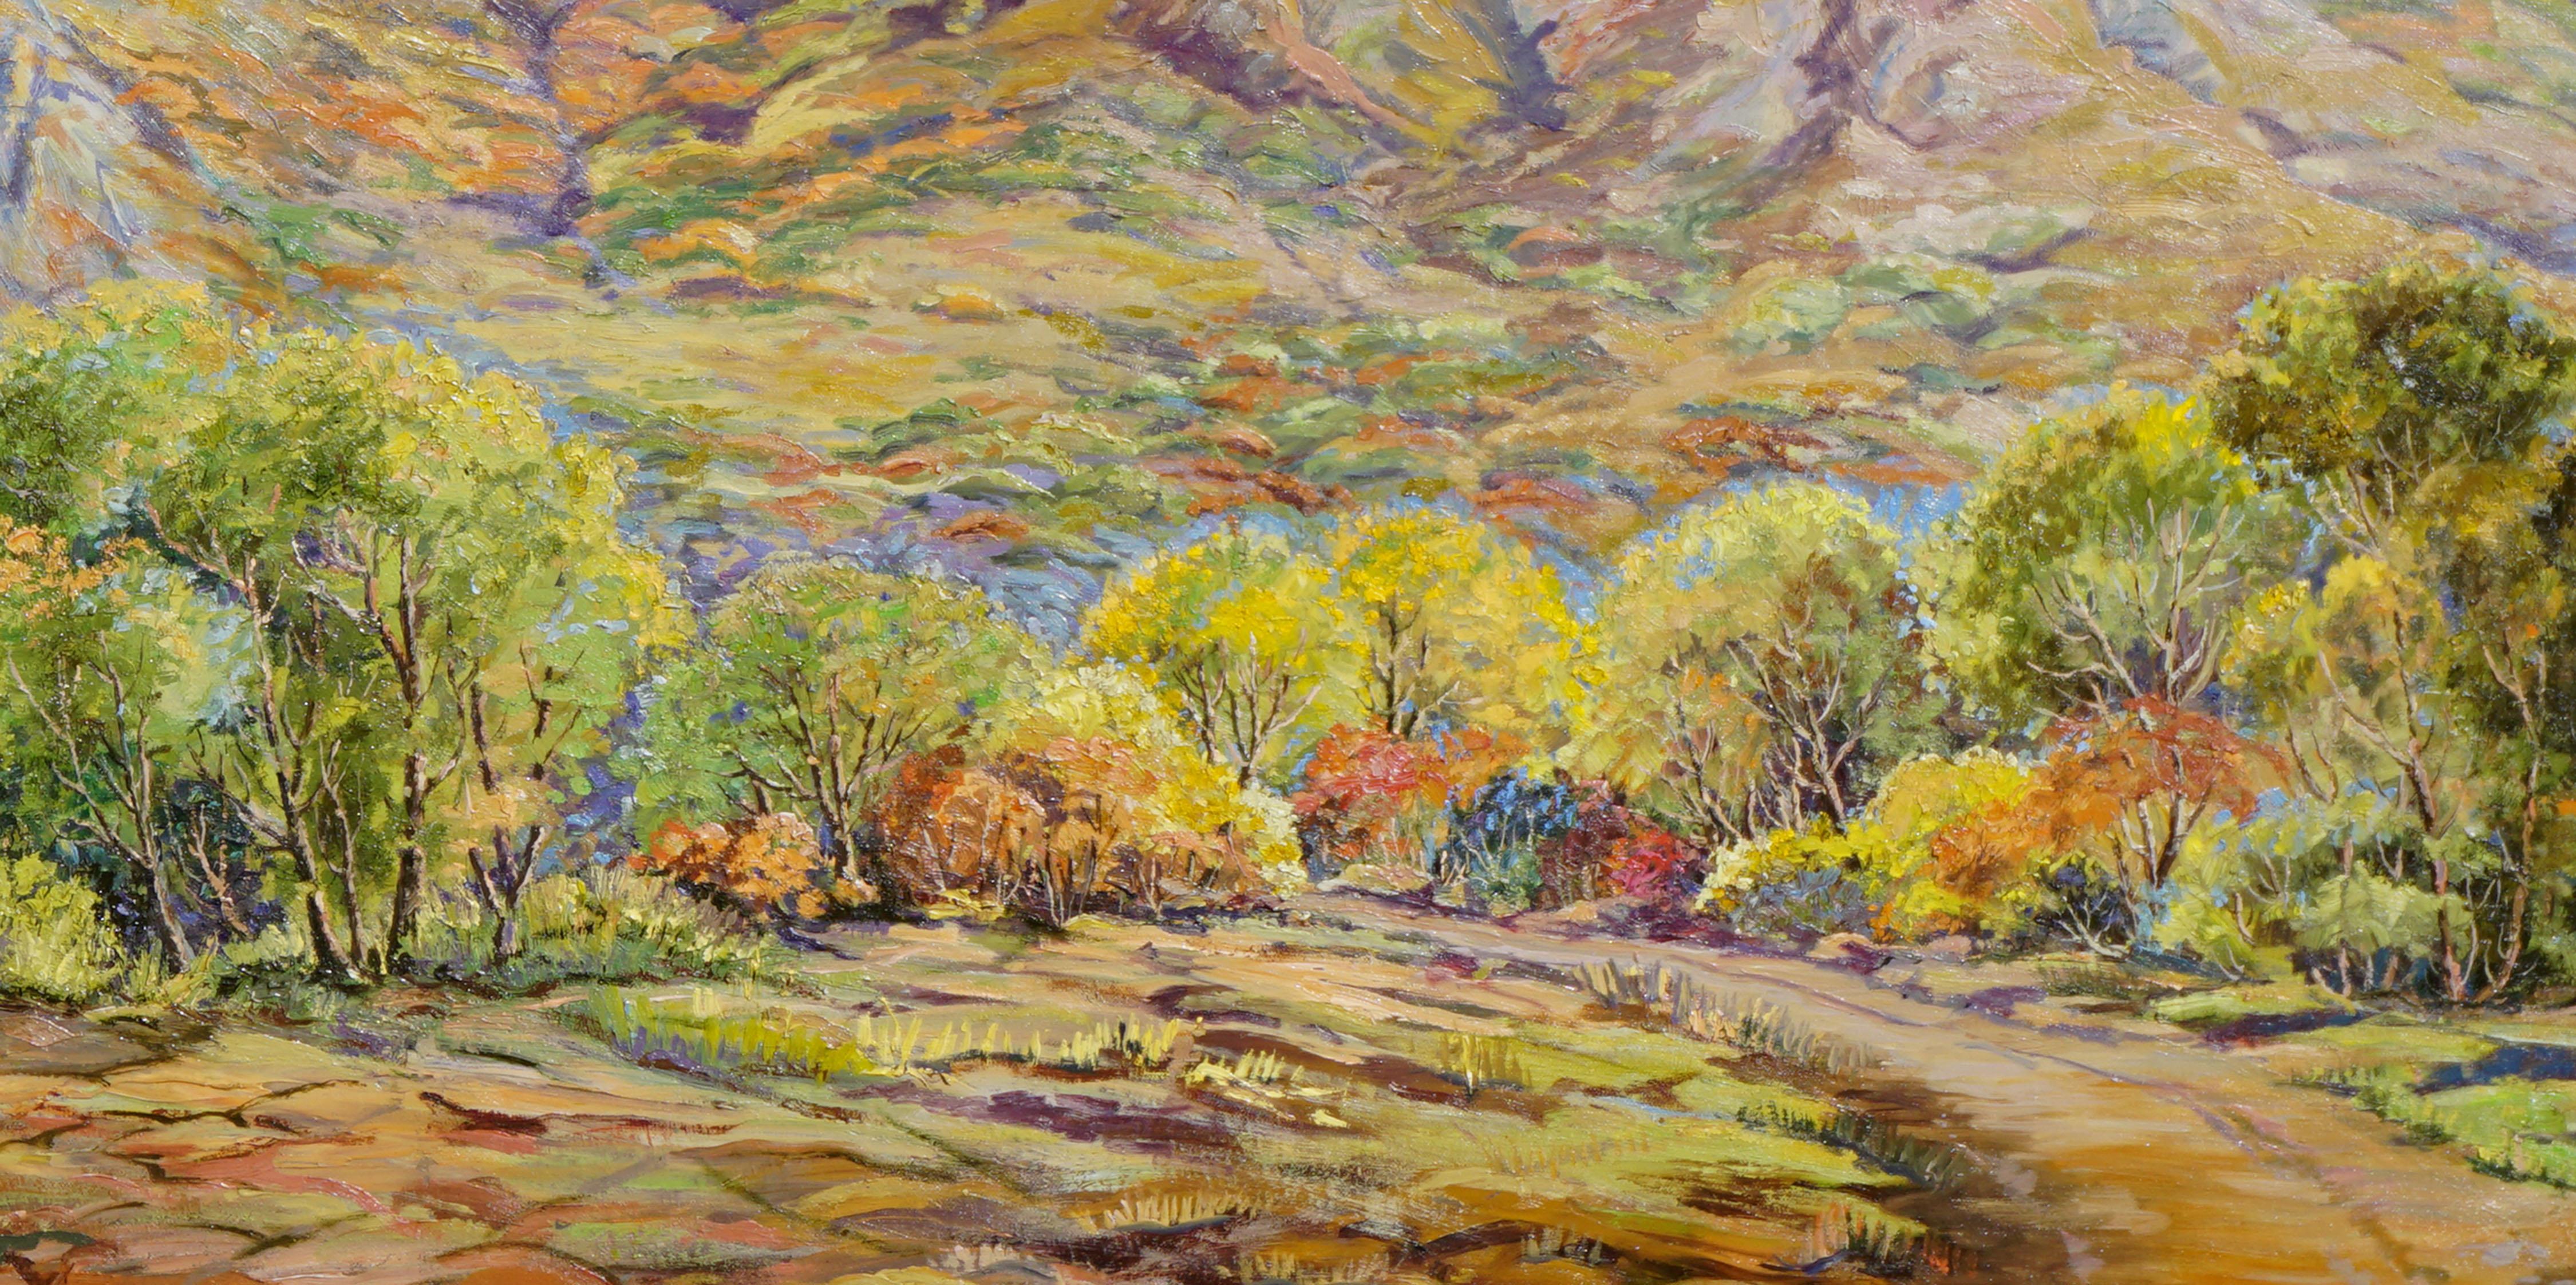 Ogden, Utah in Spring - Mid Century Mountain Landscape - Painting by Grace Peterson